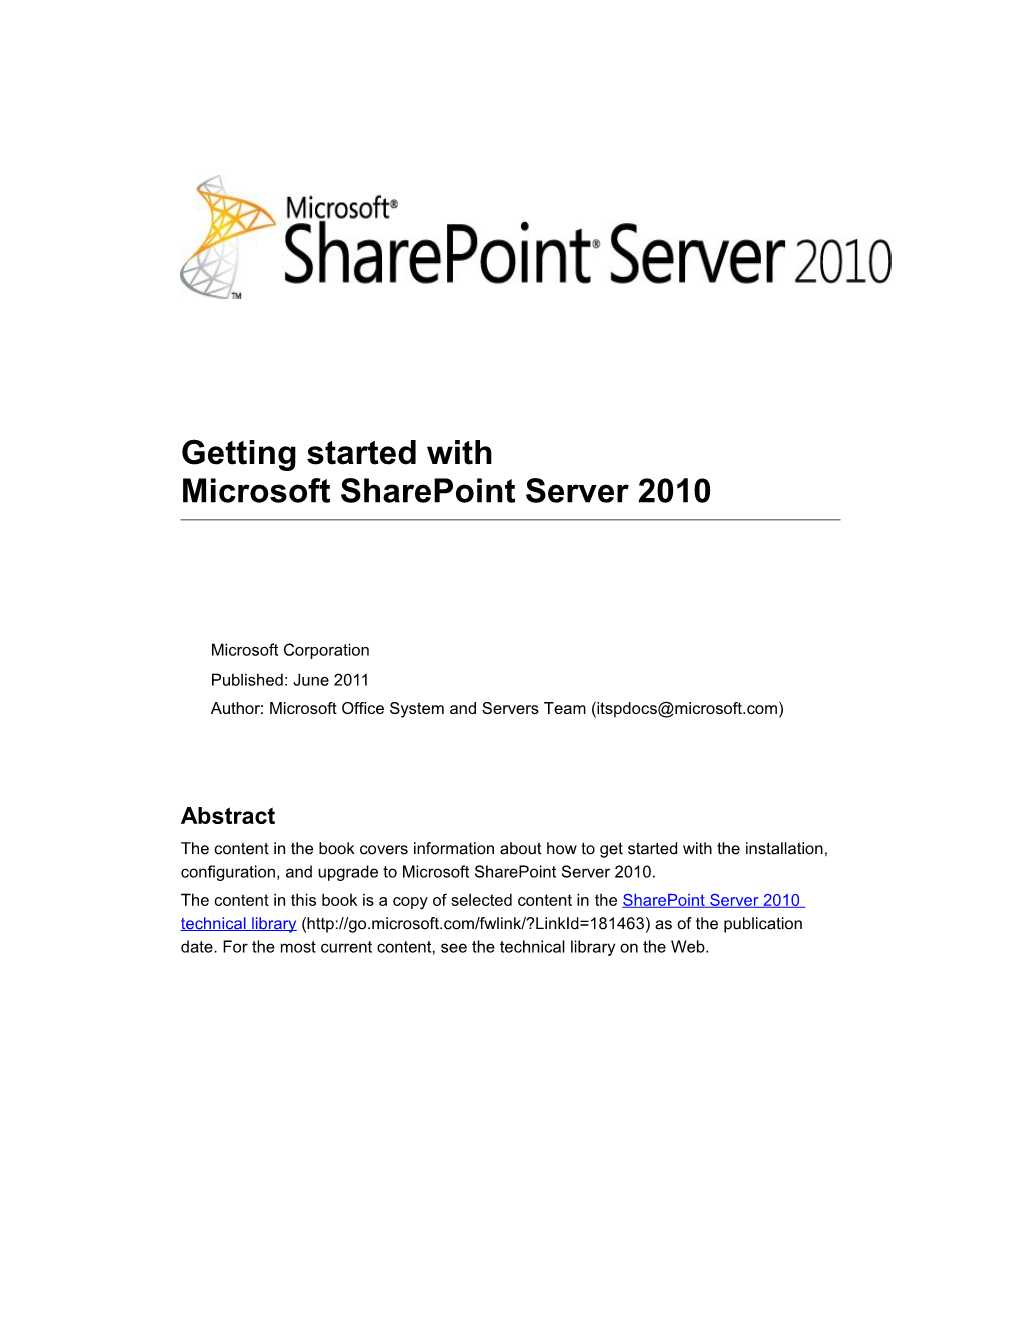 Getting Started with Microsoft Sharepoint Server 2010